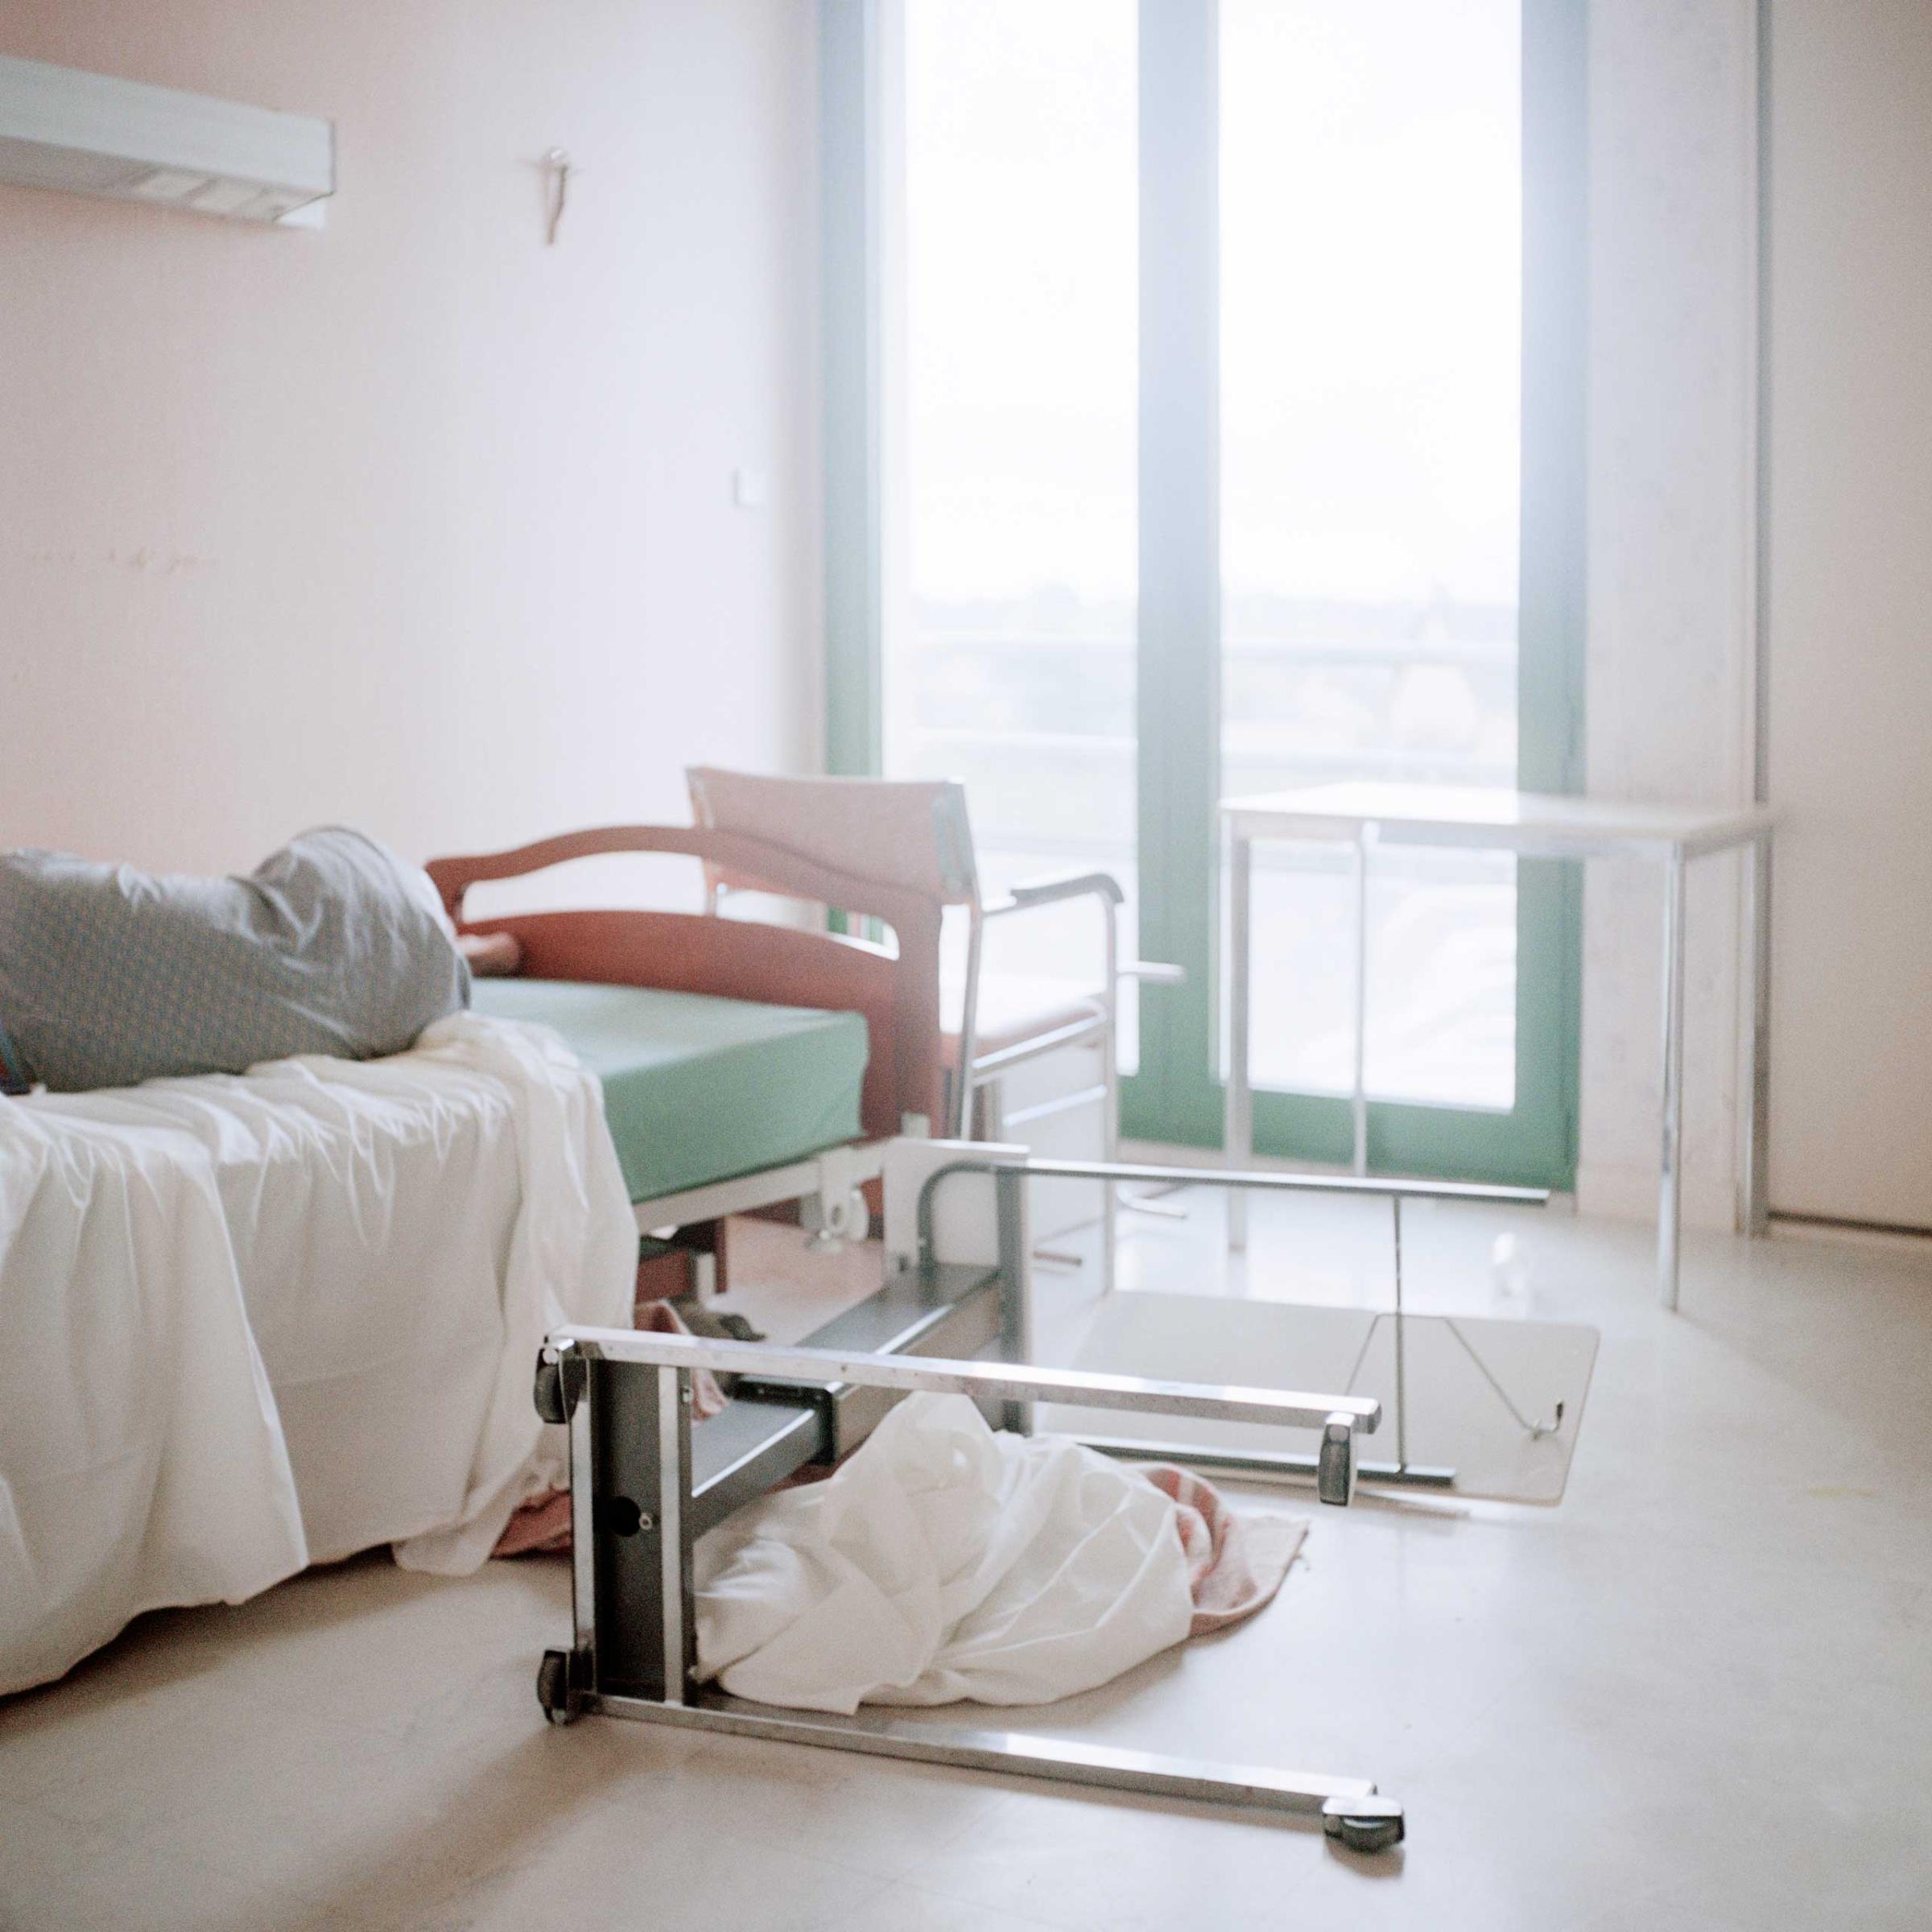 Evidence of a difficult night at 7 a.m. in a room in the Alzheimer’s ward. Alzheimer’s disease can cause behaviour difficulties such as aggressiveness, eating disorders, increased anxiety or depressive tendencies